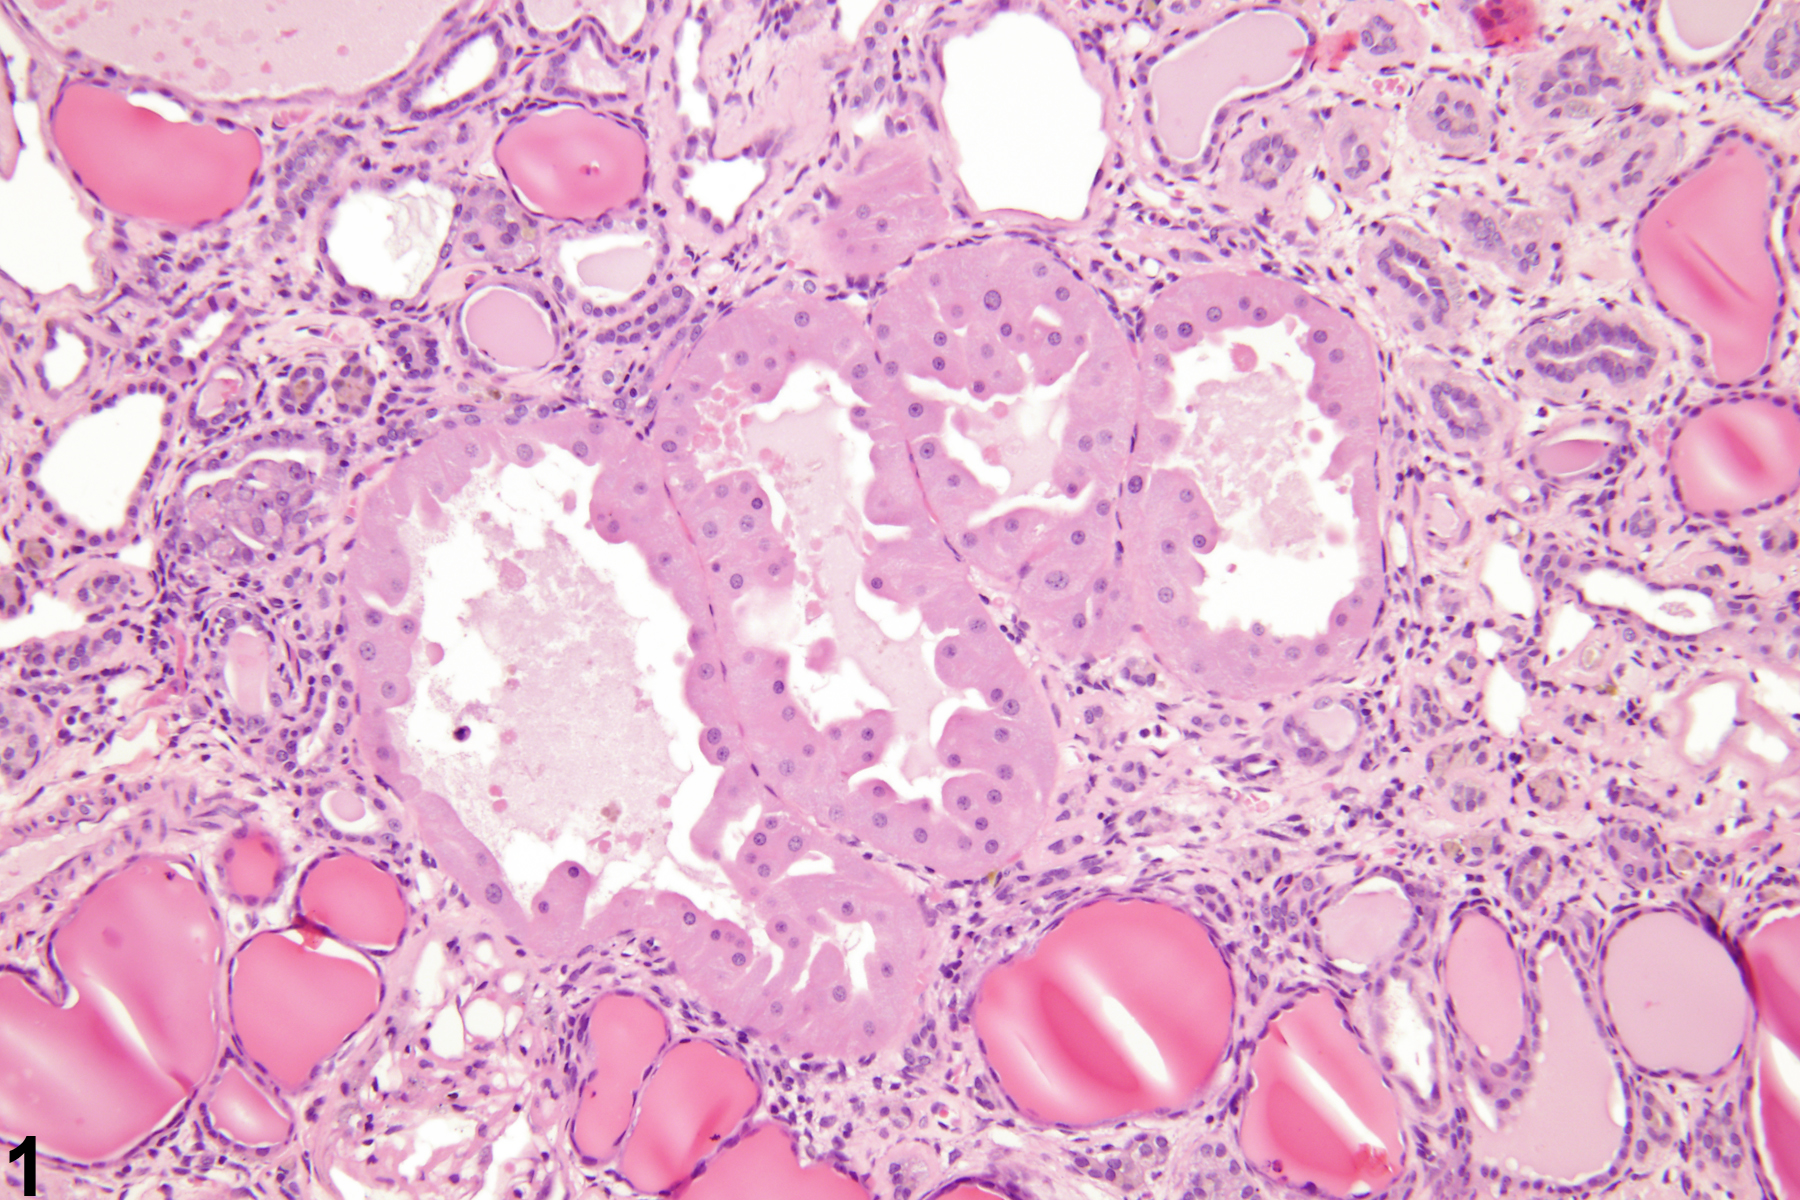 Image of renal tubule hypertrophy in the kidney from a male F344/N rat in a chronic study